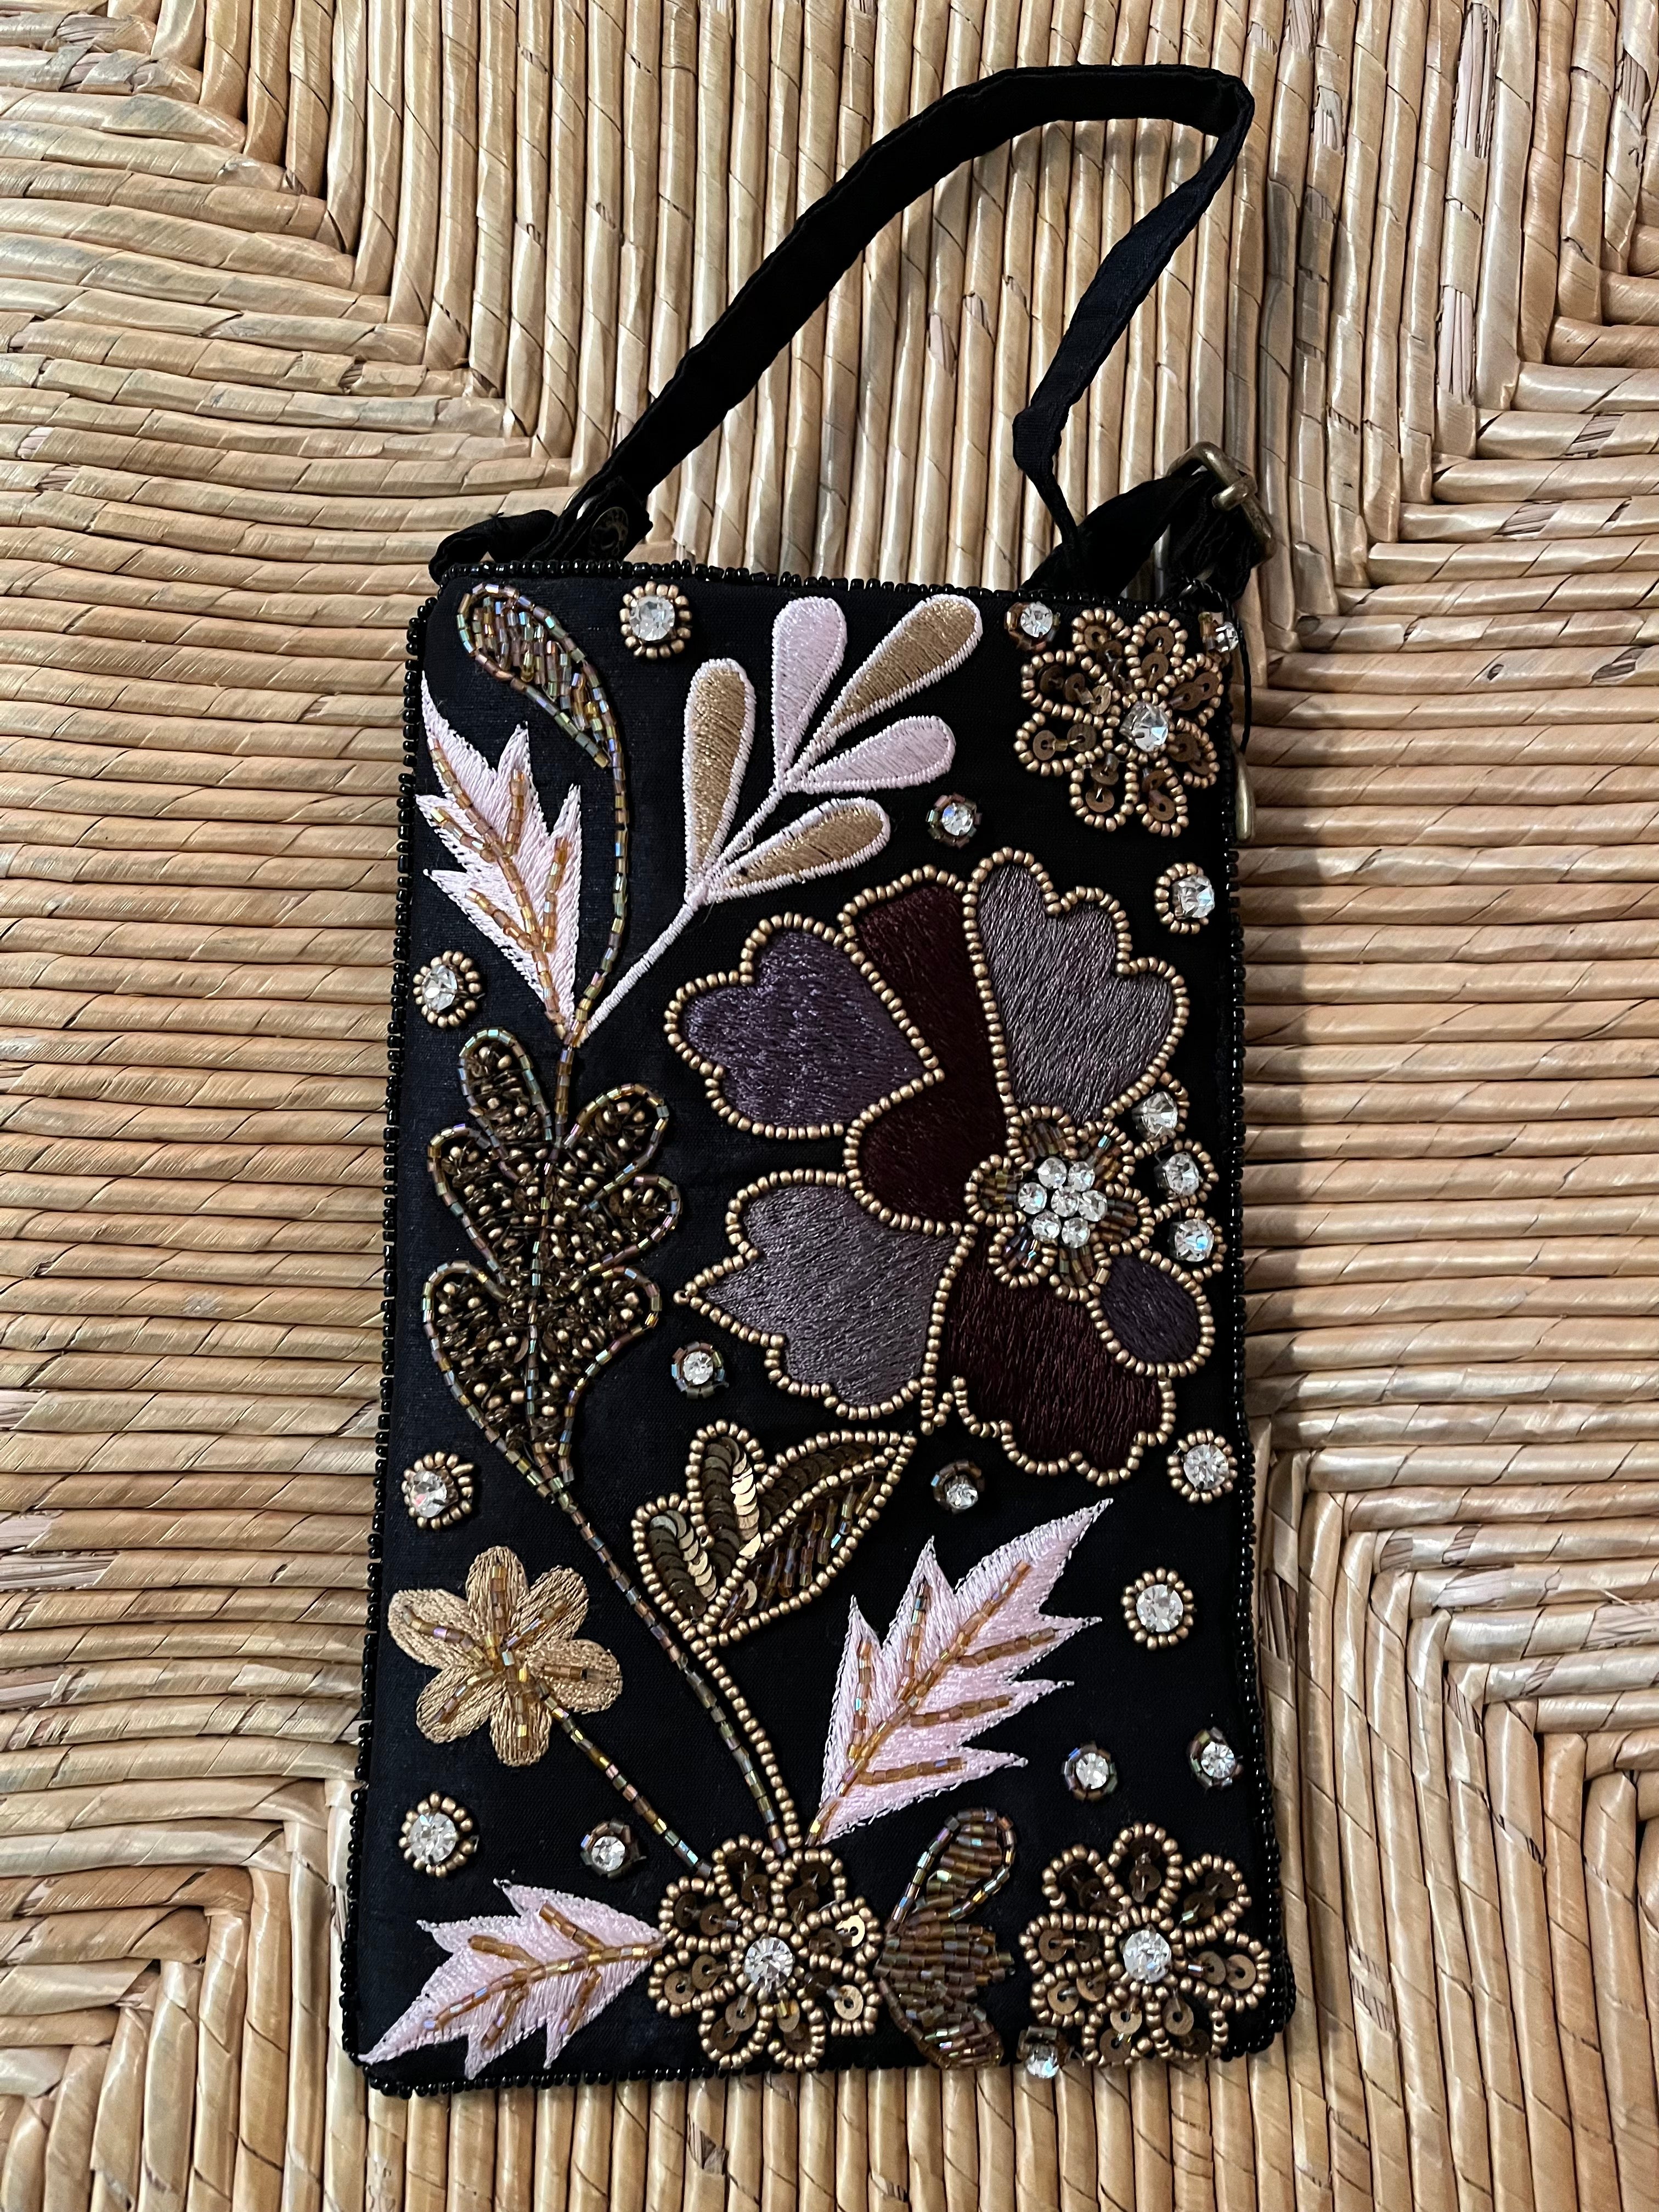 Wide Purse Strap - Custom Beaded Starry Starry - You Choose The Colors